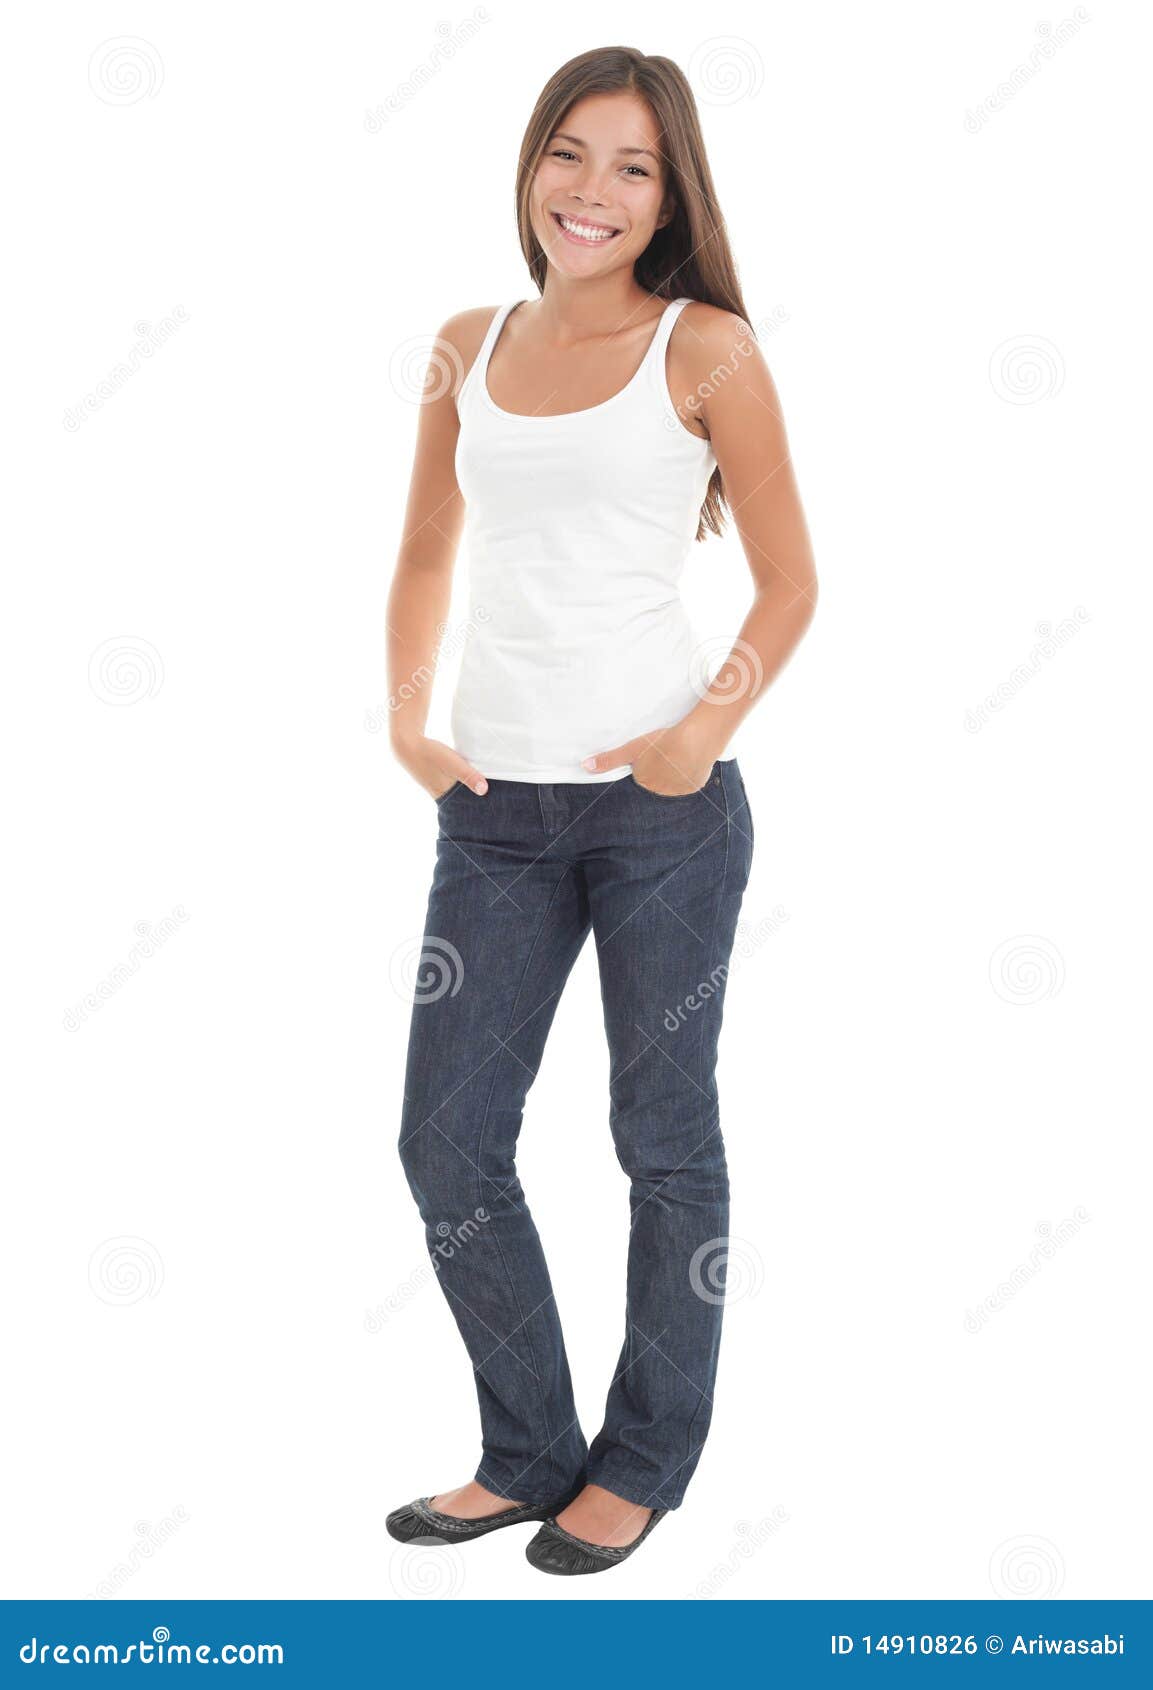 Casual Woman Standing Royalty Free Stock Image - Image: 14910826